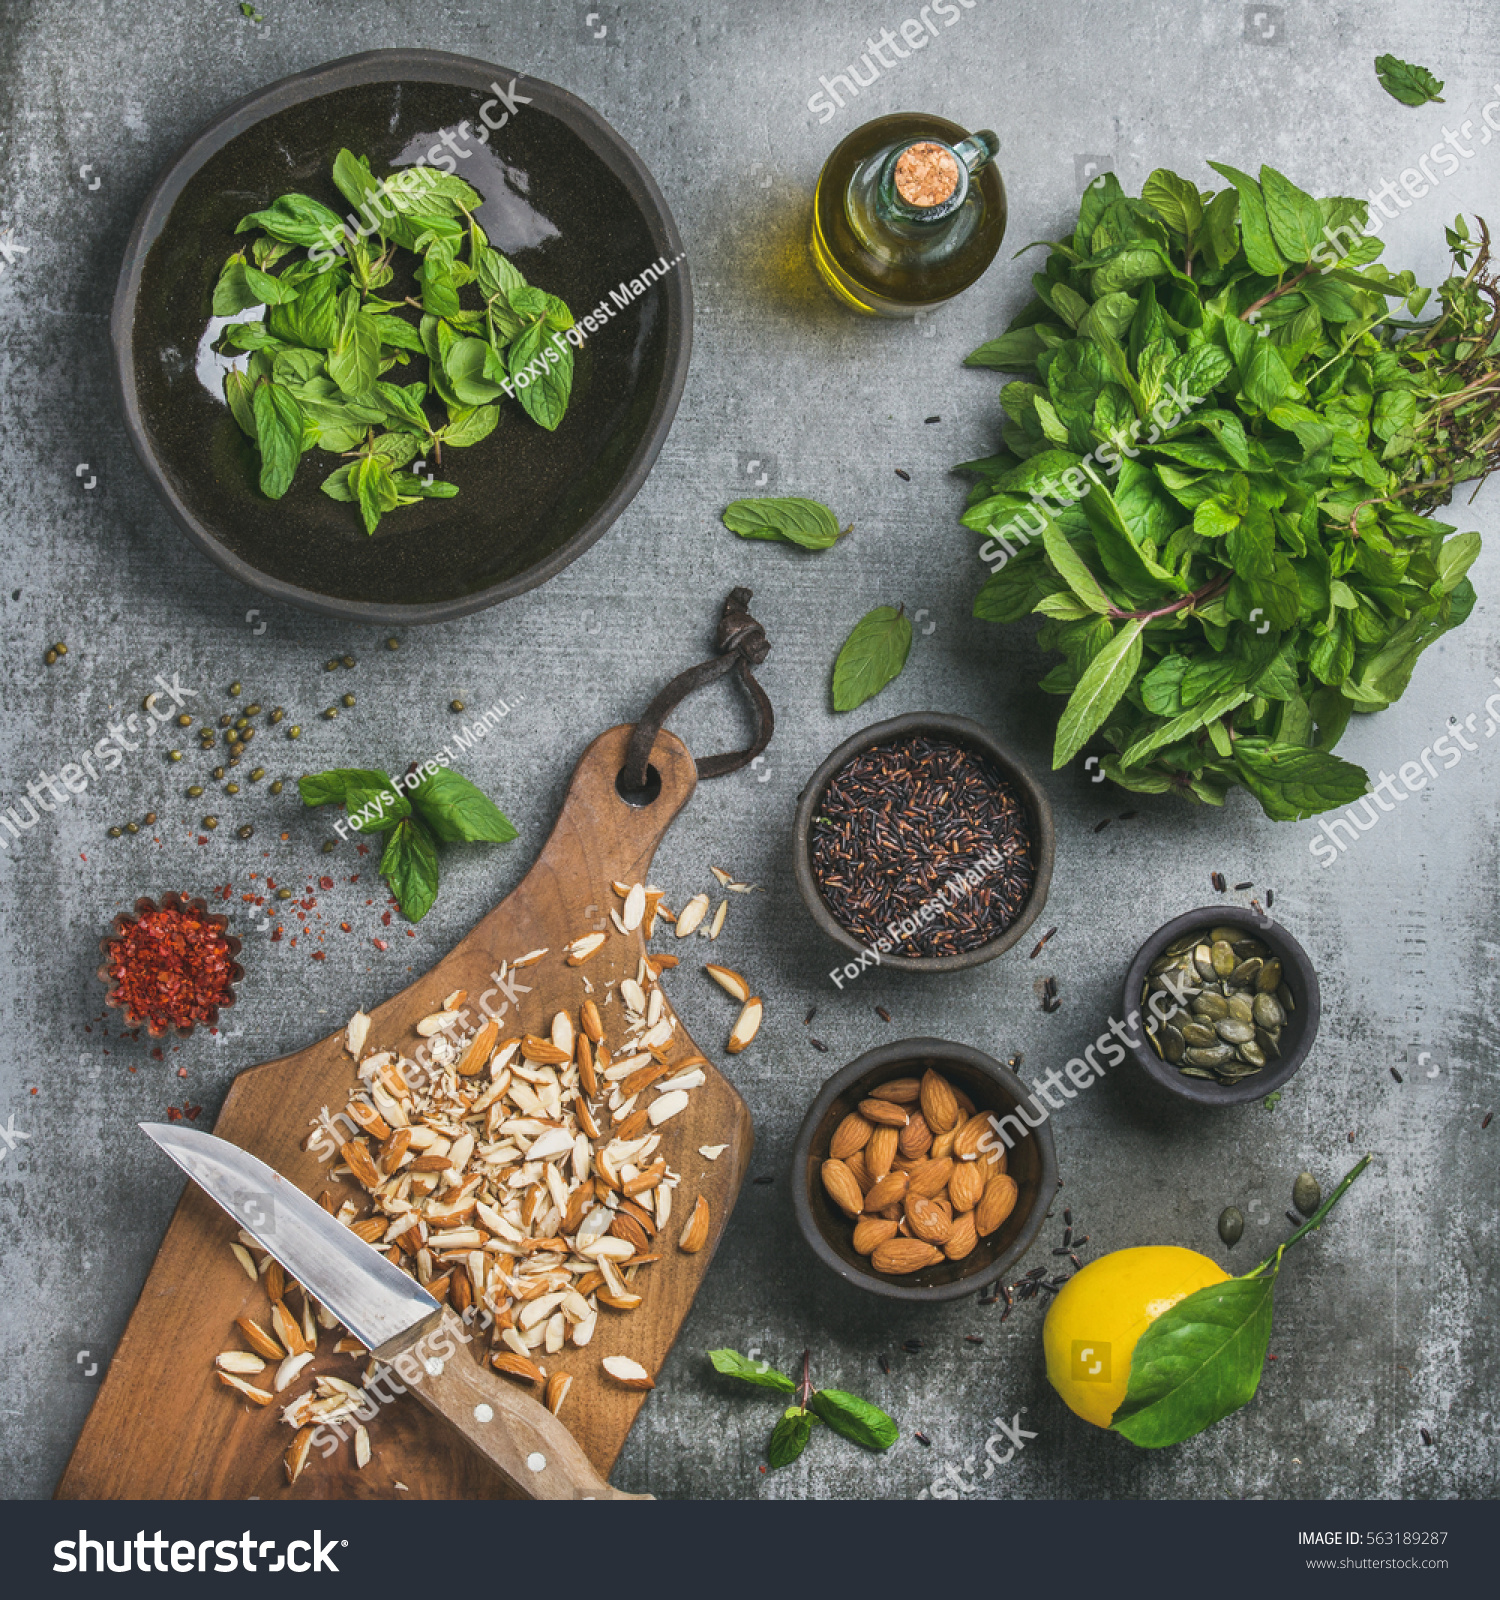 Healthy, vegan, clean eating cooking ingredients. Chopped almond, fresh mint, oil, black rice, pumpkin seed, spices, lemon over grey concrete background, top view, square crop Detox or dieting concept #563189287